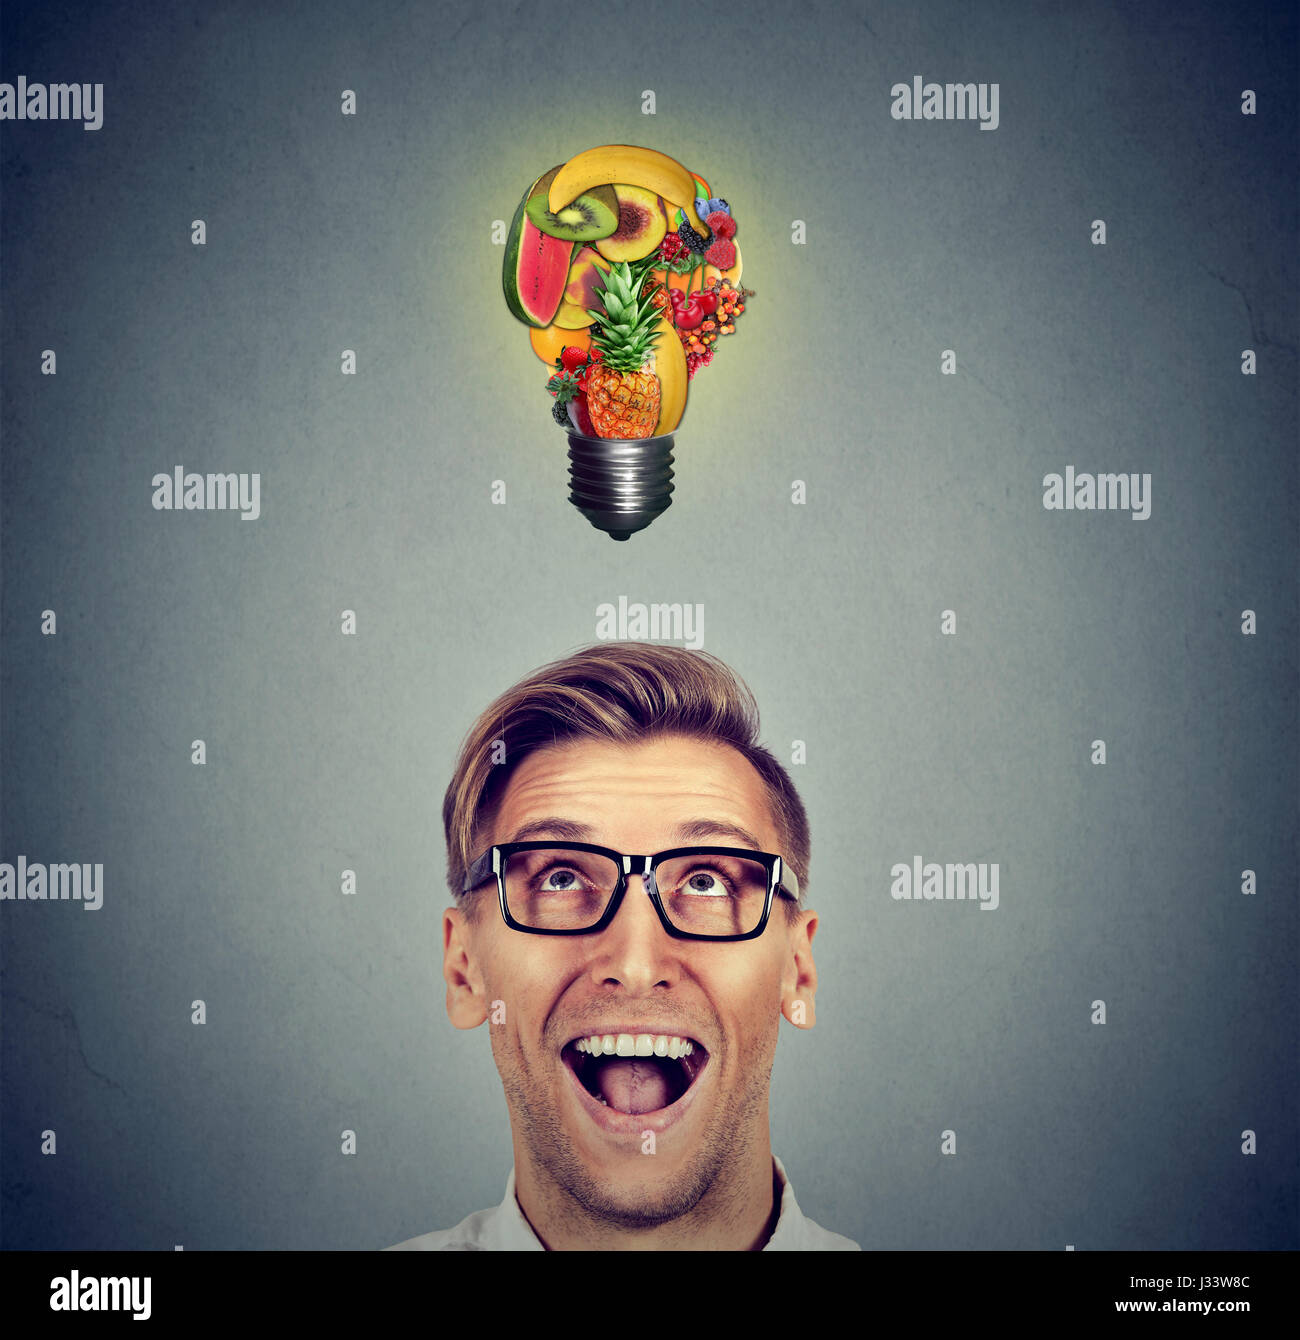 Eating healthy idea and diet tips concept. Portrait headshot man looking up light bulb made of fruits above head on gray wall background. Stock Photo